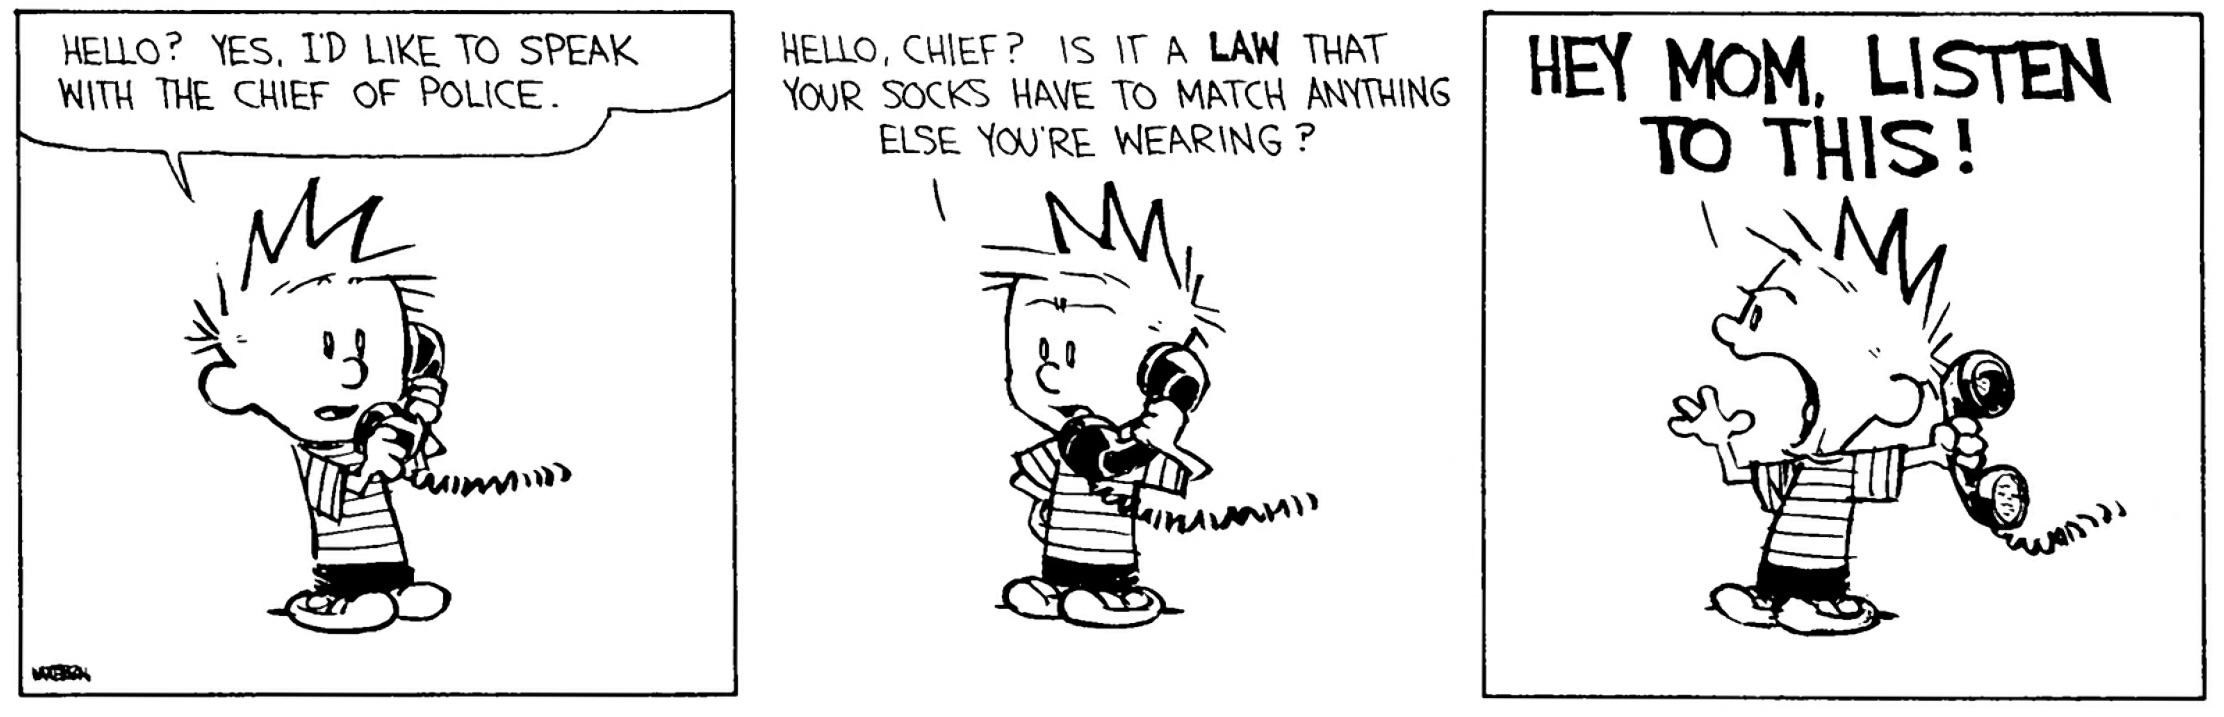 memes - calvin and hobbes socks - Hello? Yes, I'D To Speak With The Chief Of Police. Hello, Chief? Is It A Law That Your Socks Have To Match Anything Else You'Re Wearing ? To This! Md hawai wand a M